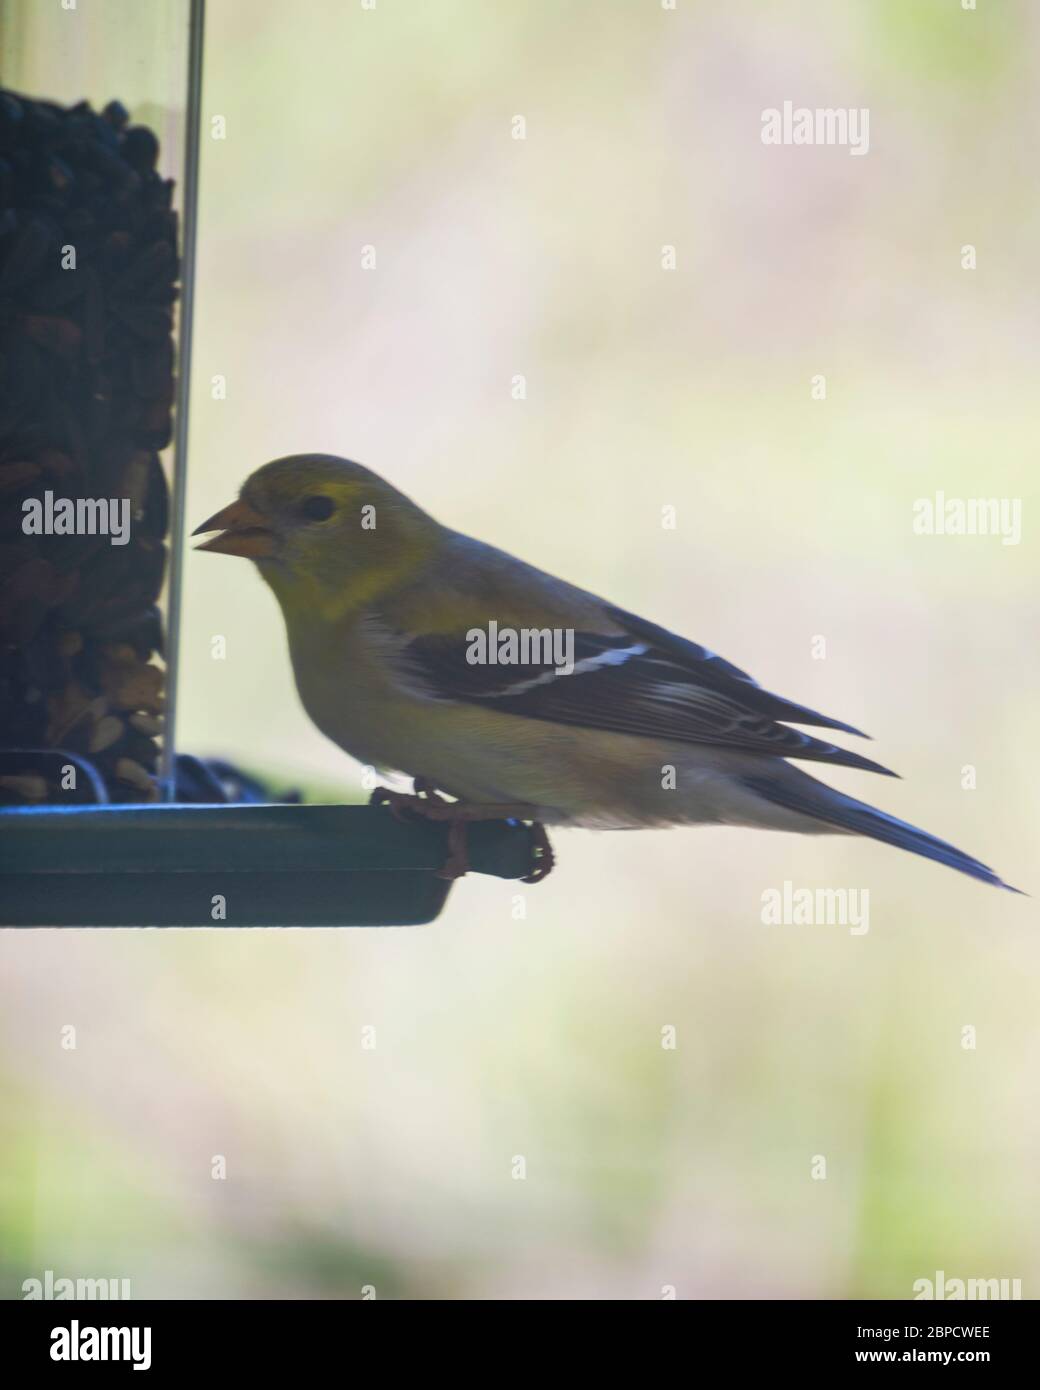 Female Goldfinch perched at a backyard feeder eating bird seed.  Background blurry. Stock Photo